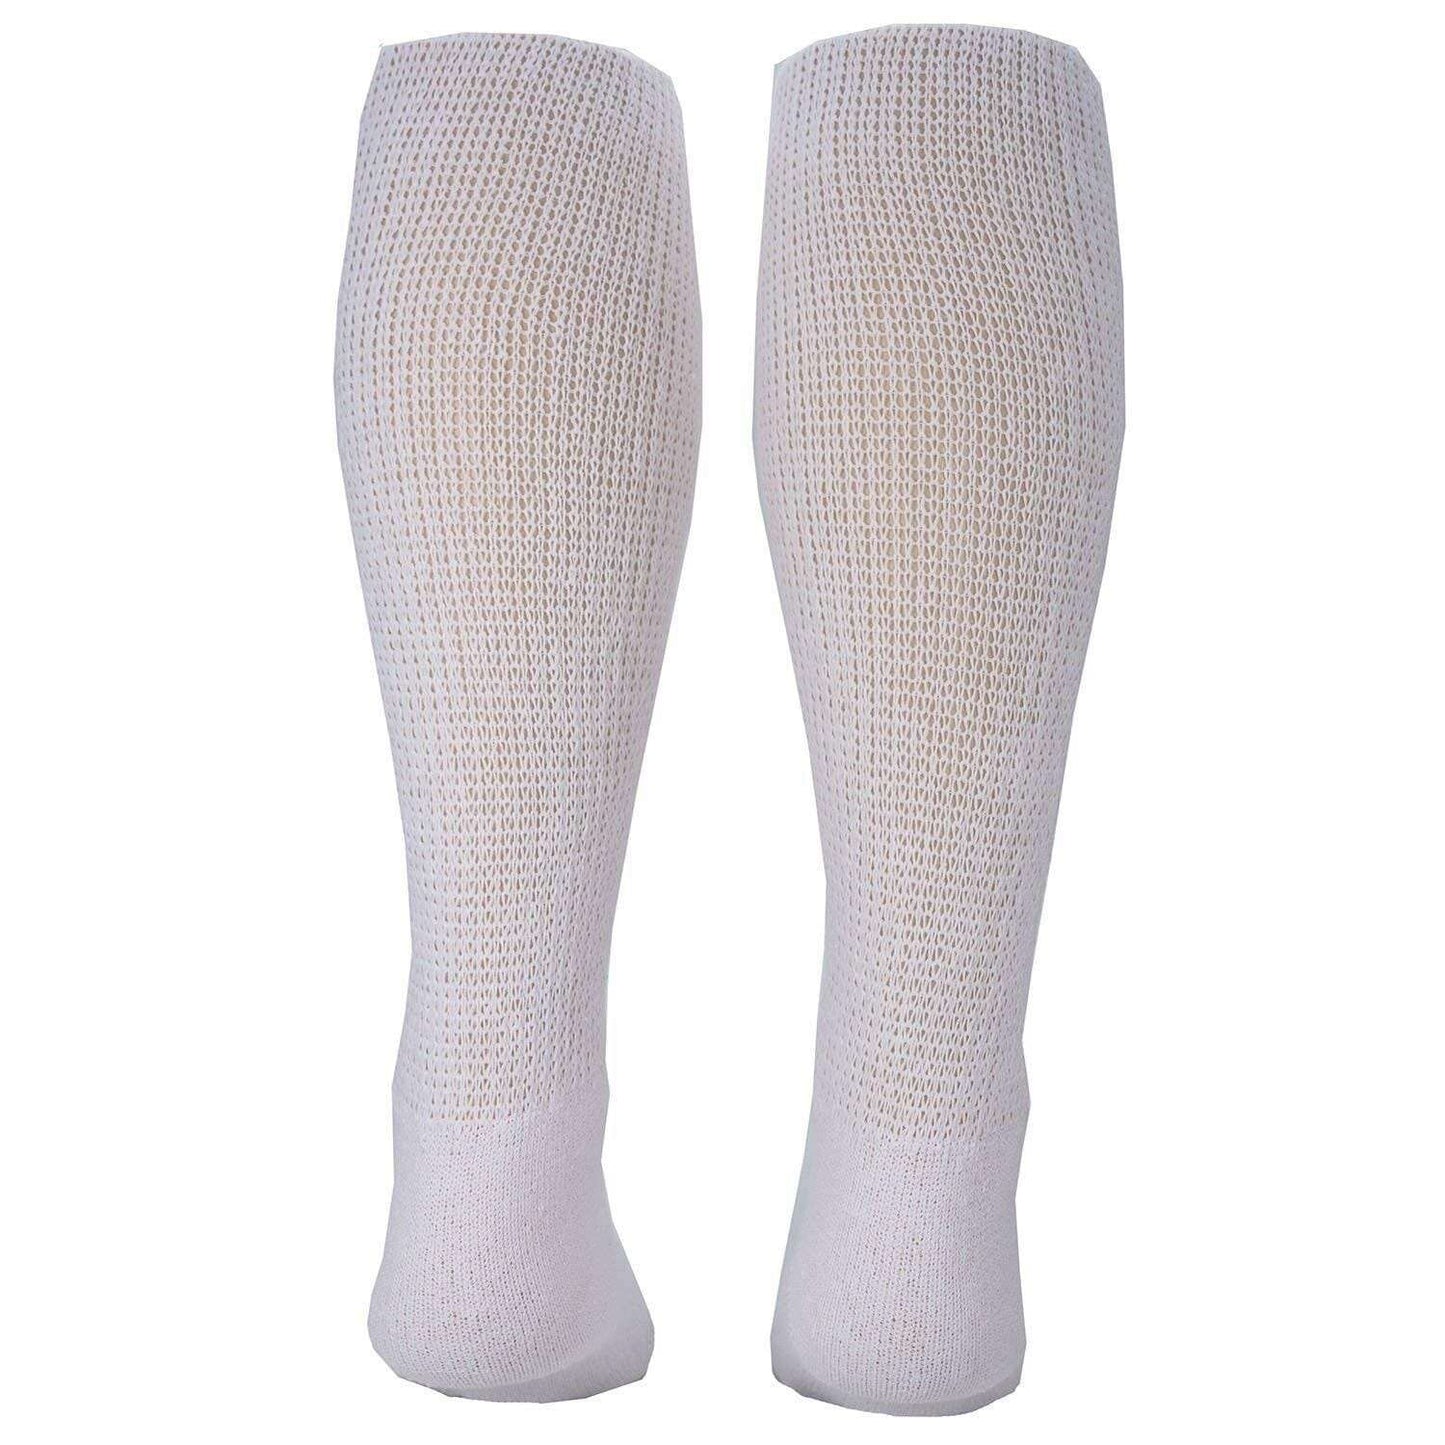 MDR Diabetic Over The Calf Length Crew Socks (12 Pair Pack) Seamless Cotton... - Mdrdistributors